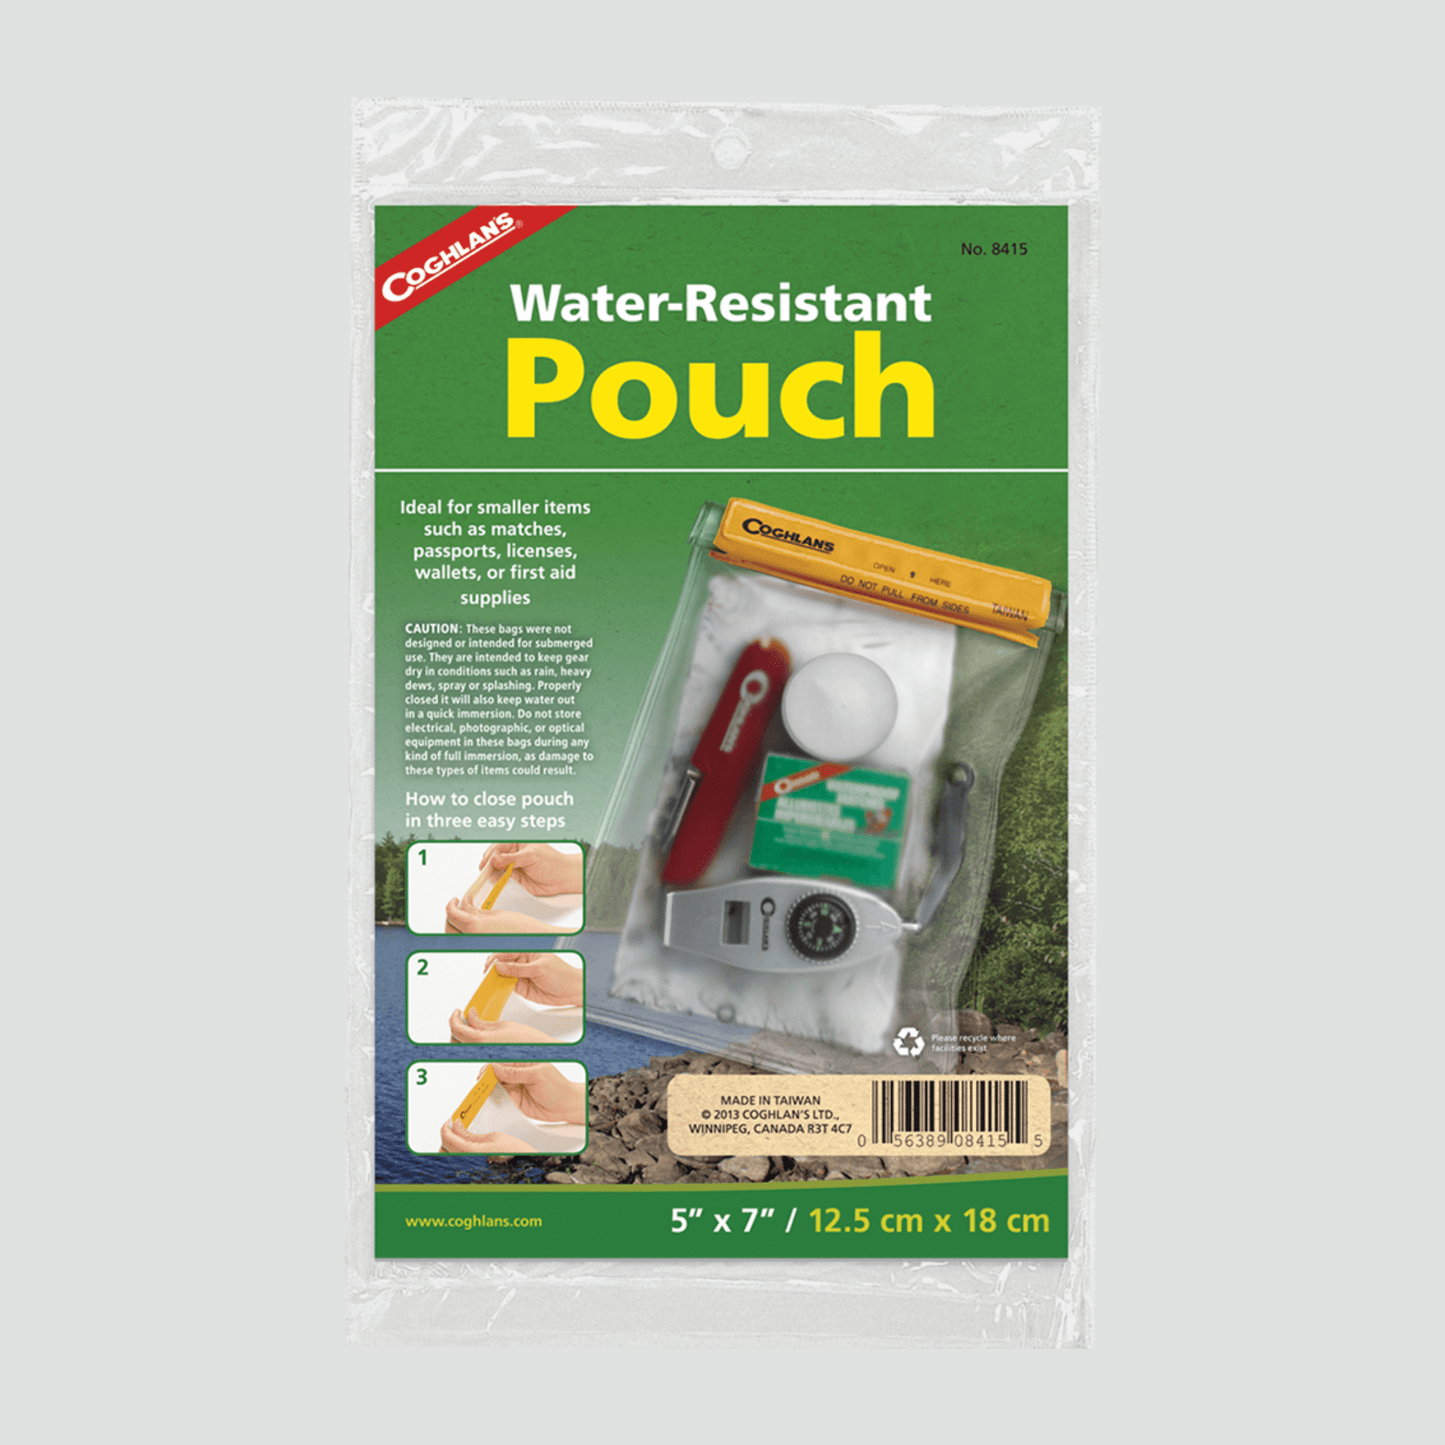 5"x7" water resistant pouch